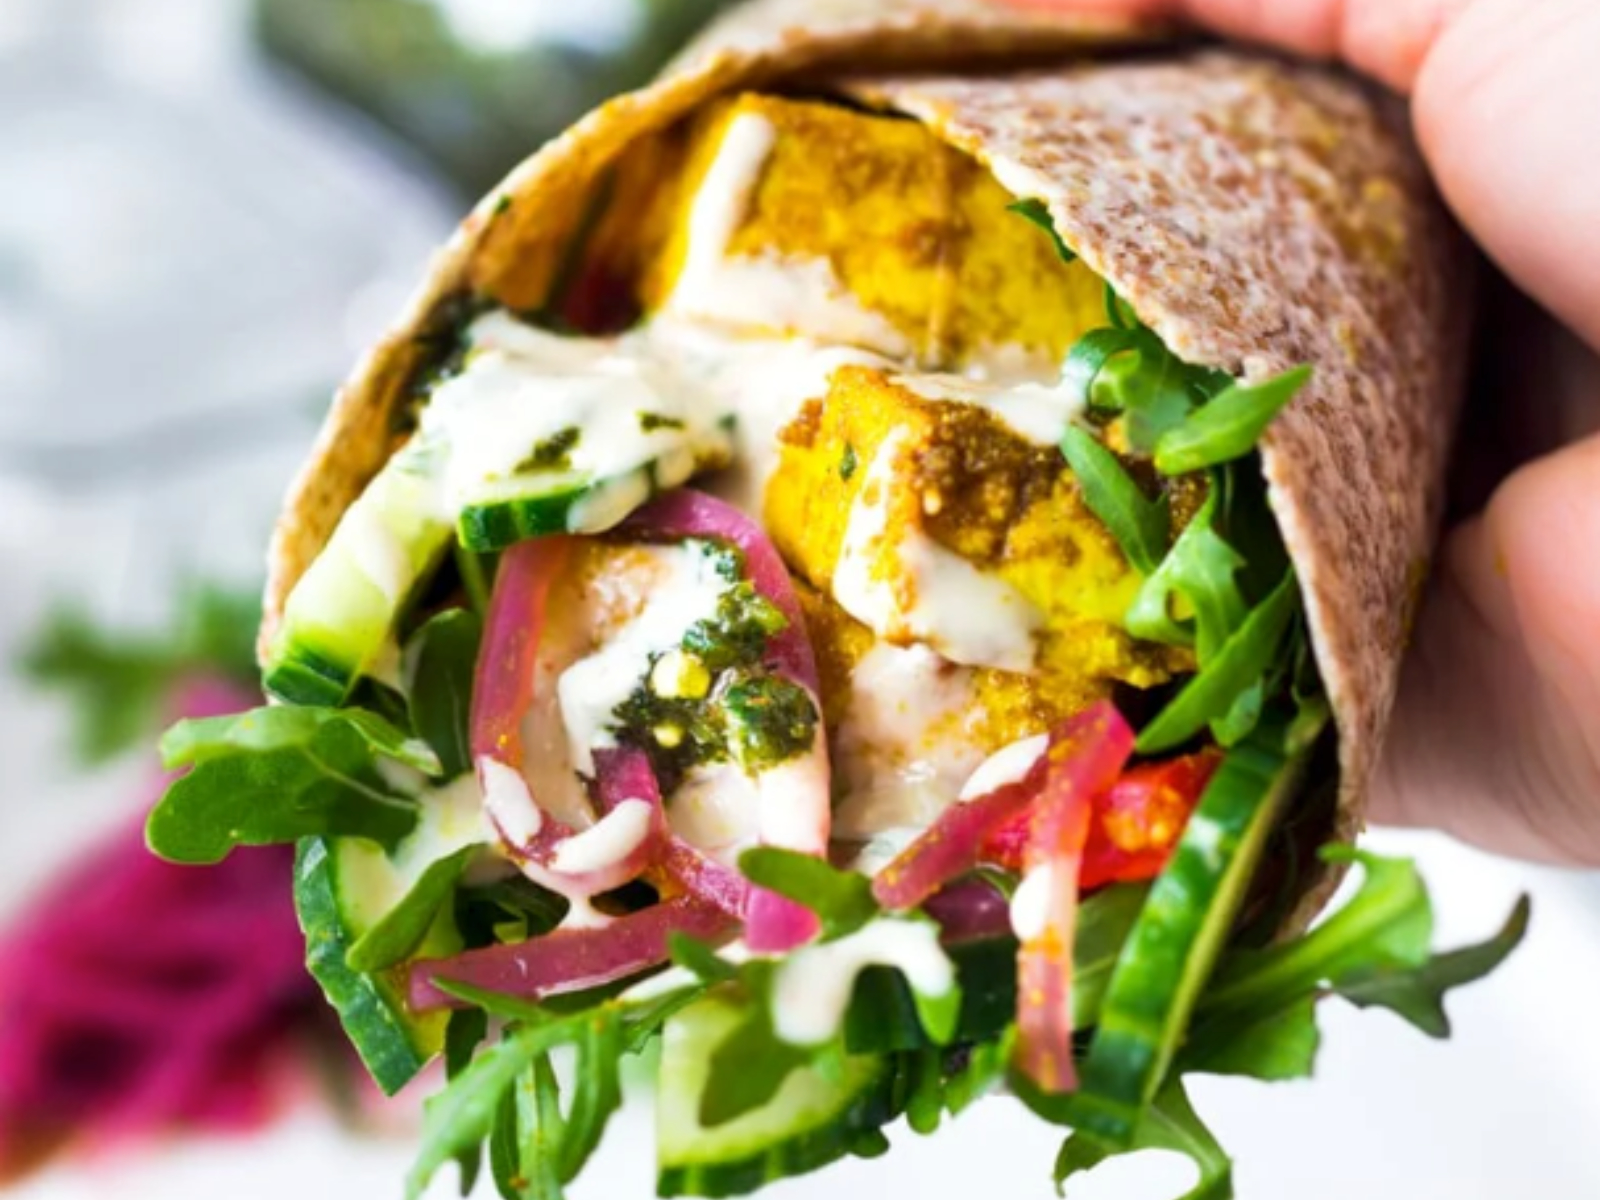 baked chicken shawarma with veggies in a wrap